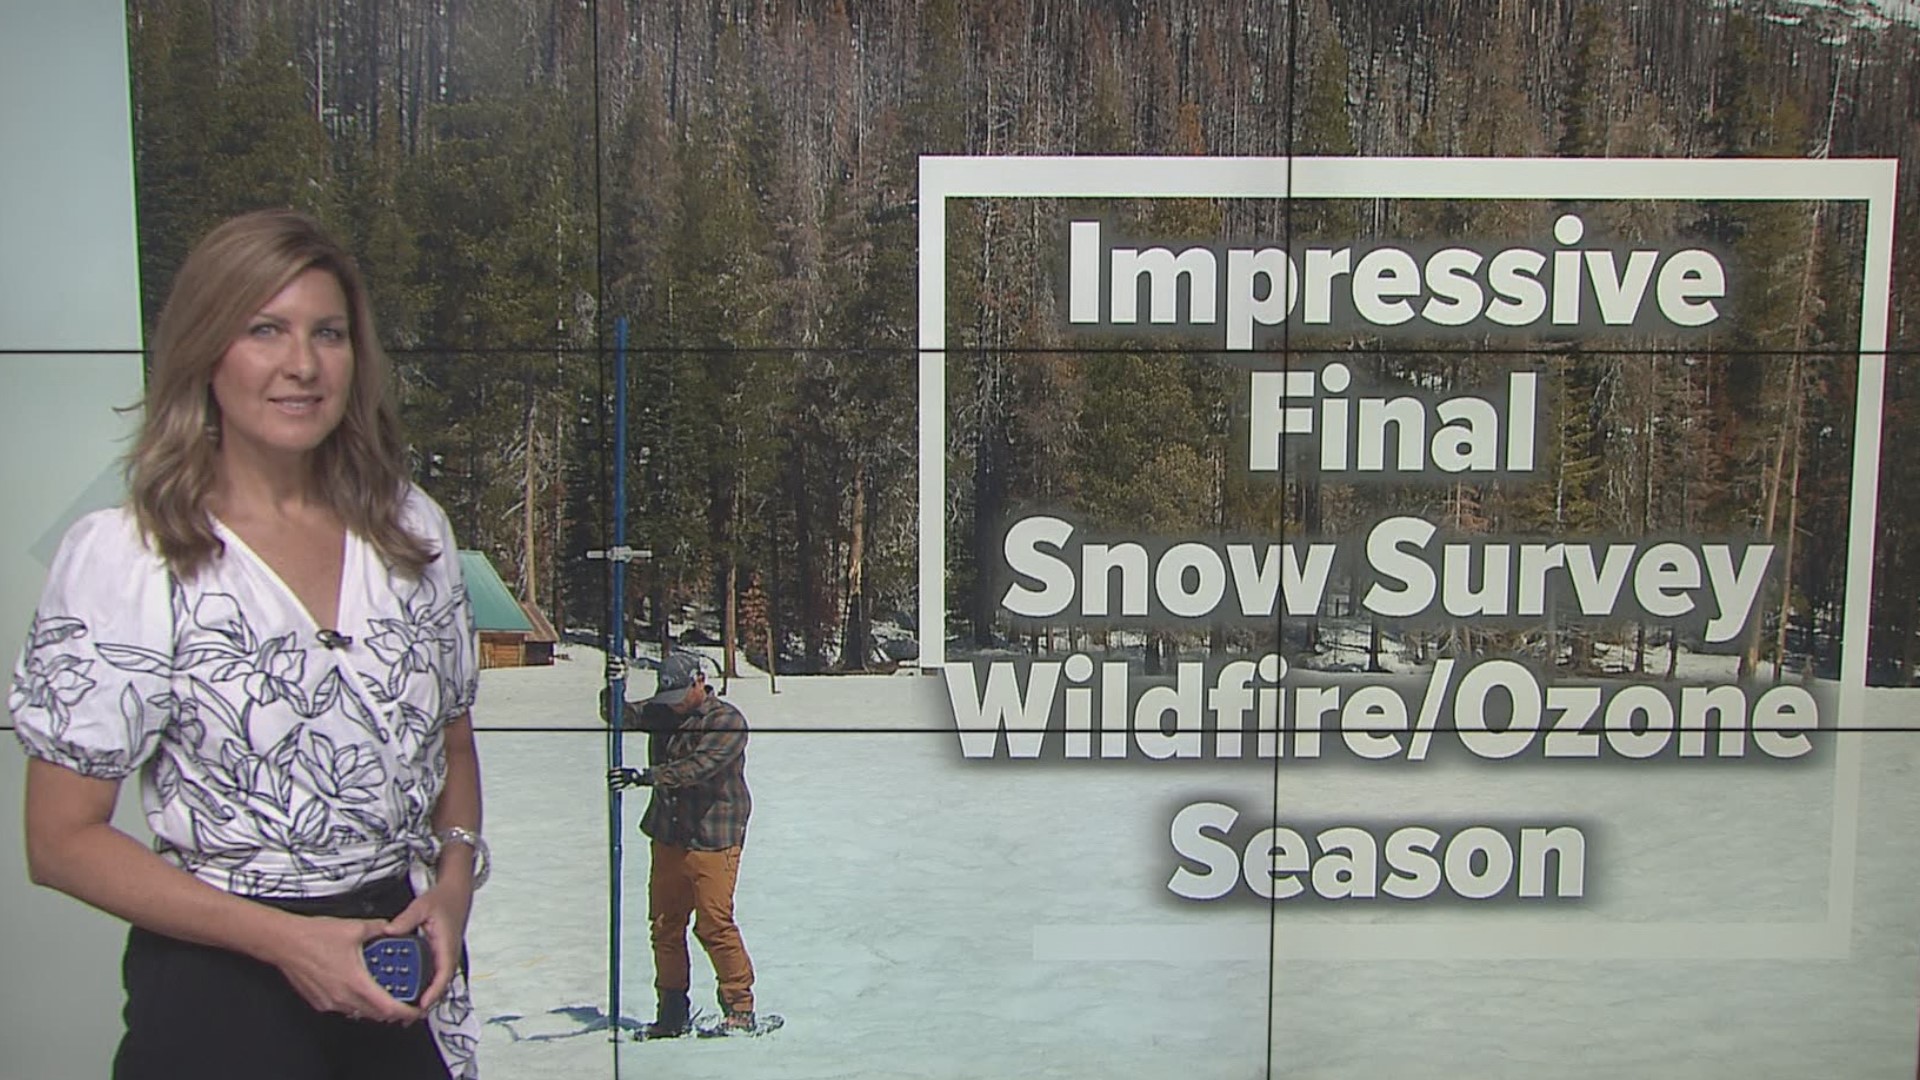 The last snow survey of the year shows big numbers for California's Sierra snowpack. Attention turns to flooding, wildfires and air quality concerns.